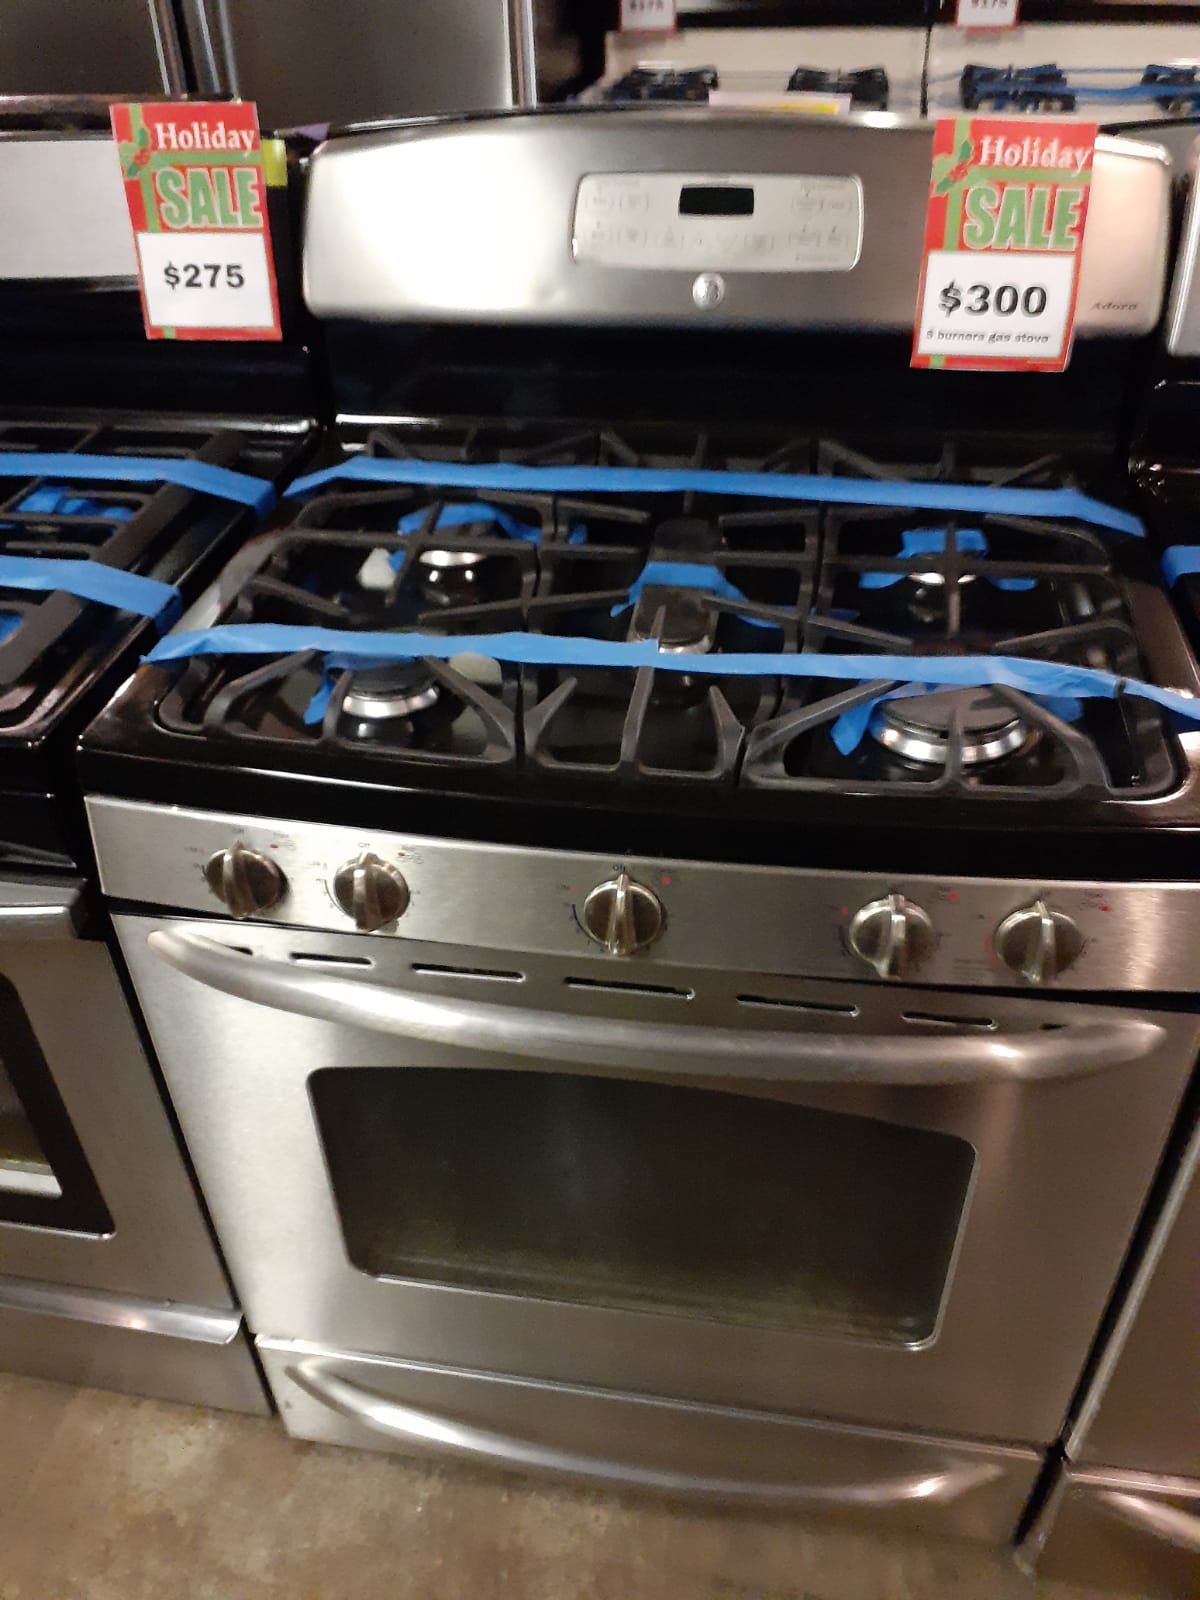 GE 5 Burnes gas stove stainless steel in excellent conditions with 4 months warranty